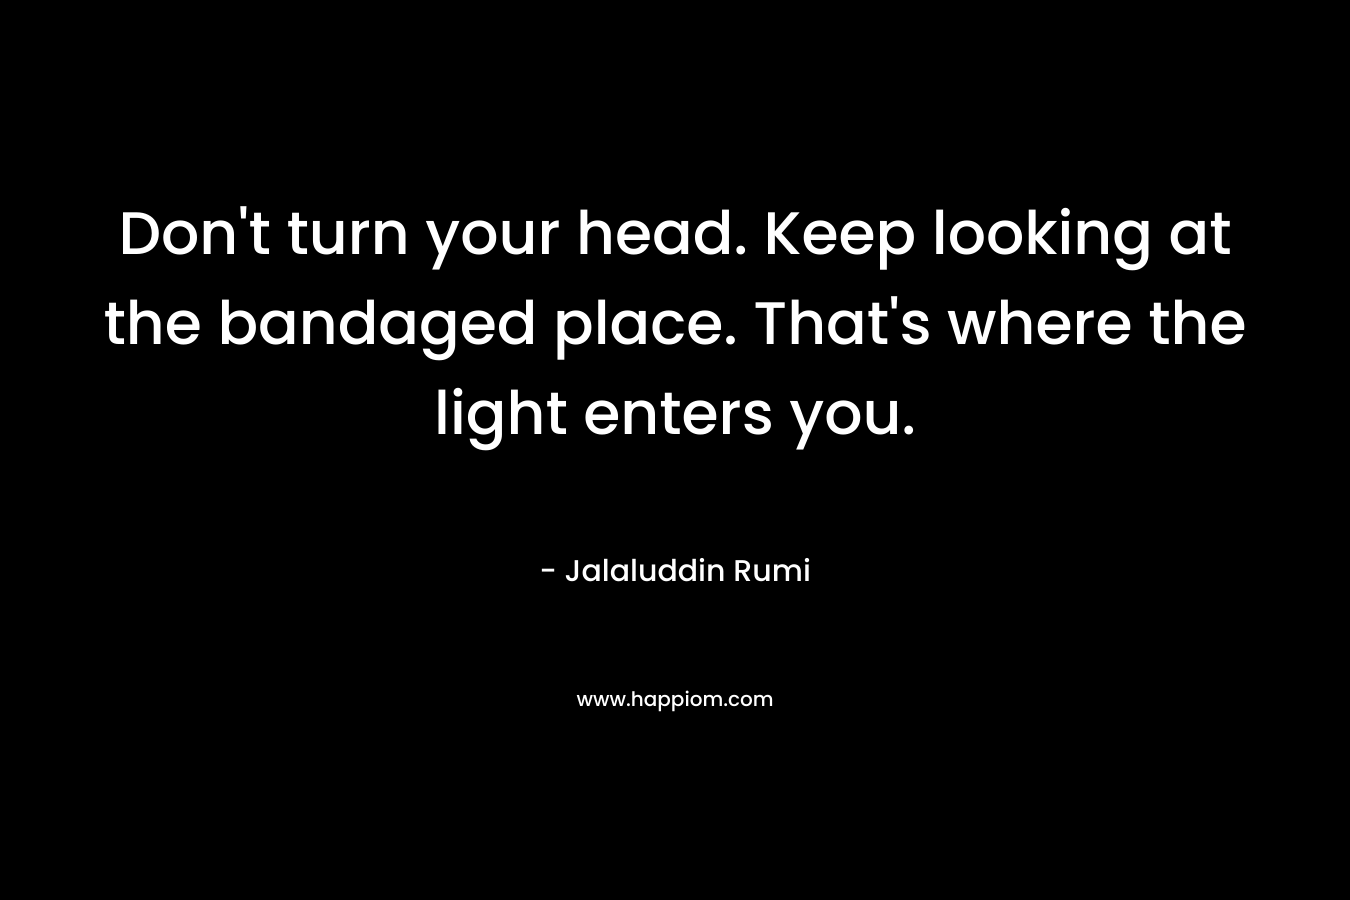 Don't turn your head. Keep looking at the bandaged place. That's where the light enters you.